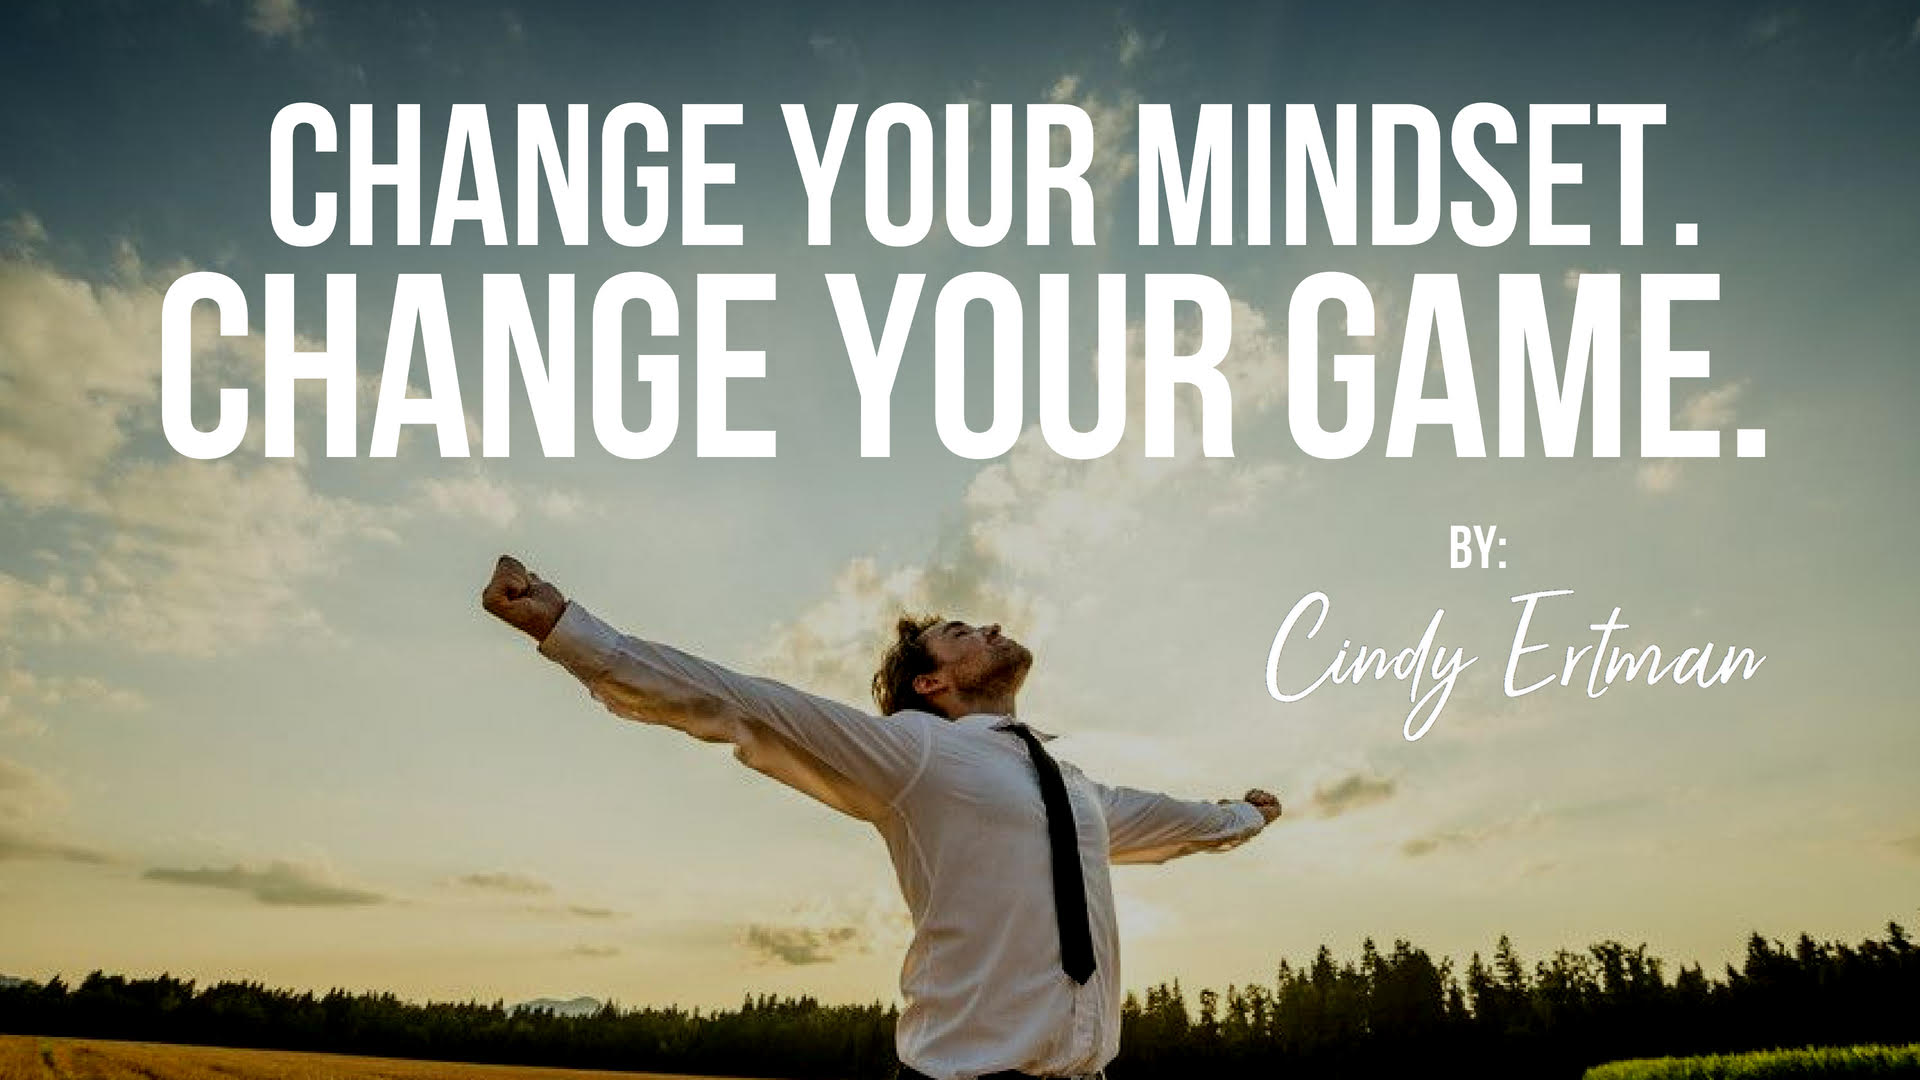 Change Your Mindset. Change Your Game.